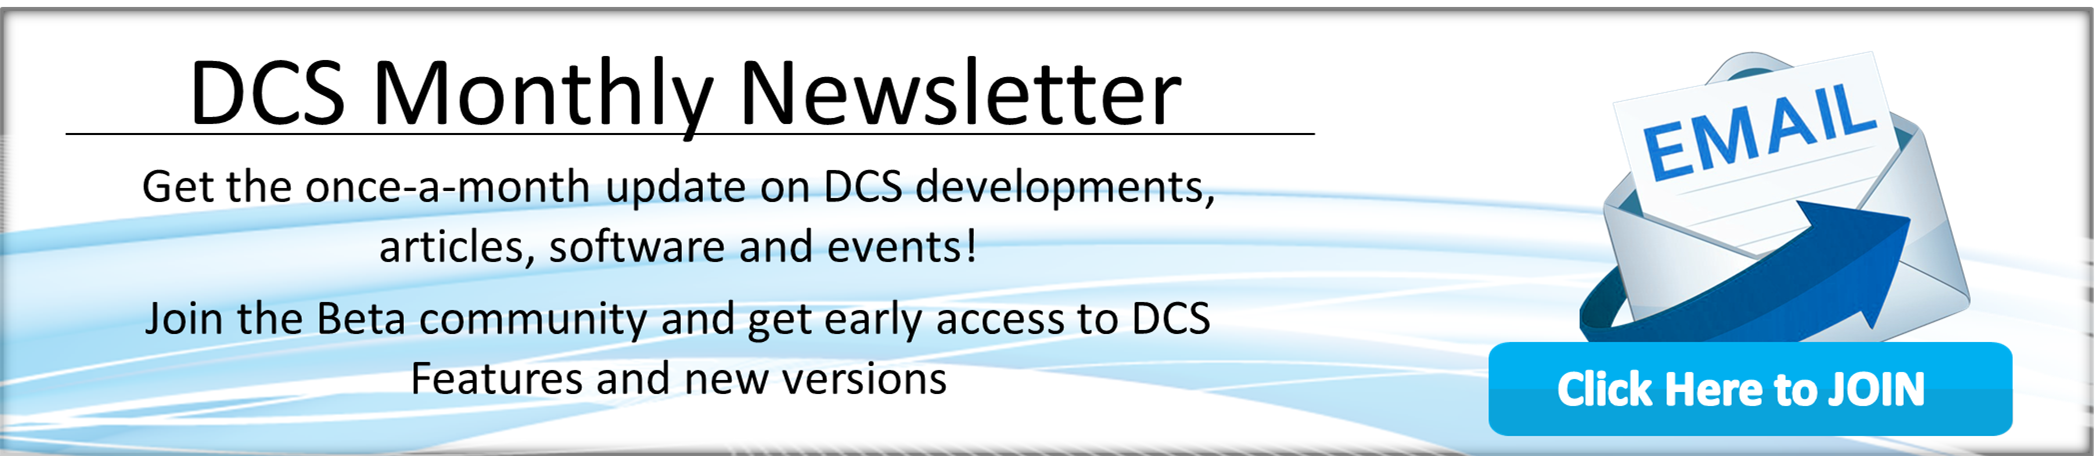 Join DCS monthly